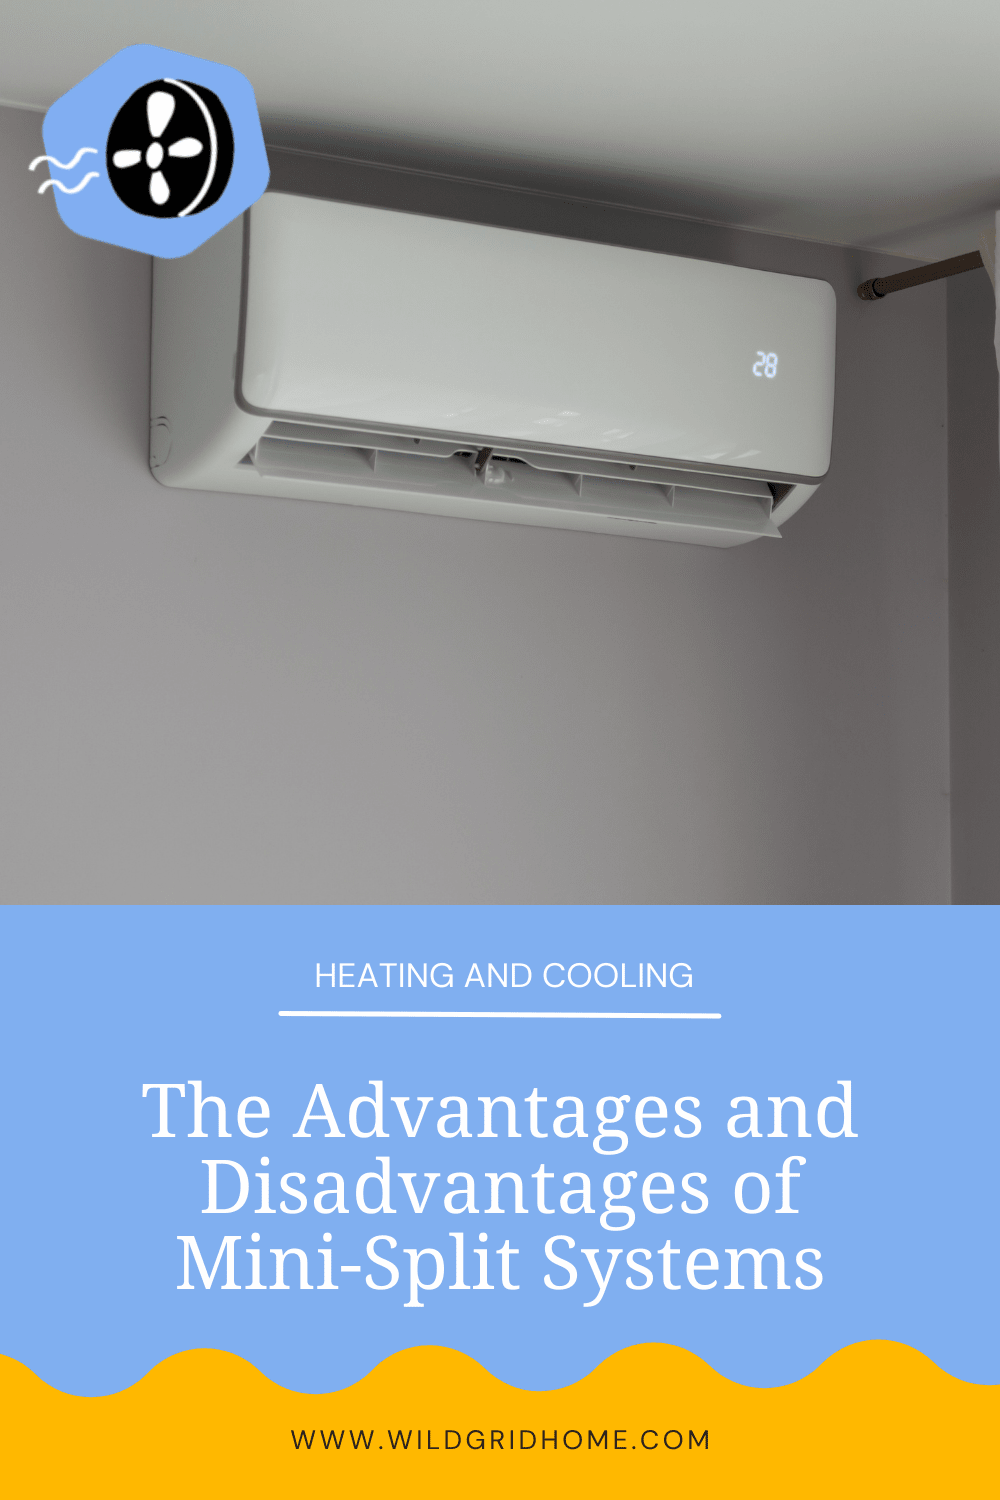 The Advantages and Disadvantages of Mini-Split Systems - Wildgrid Home